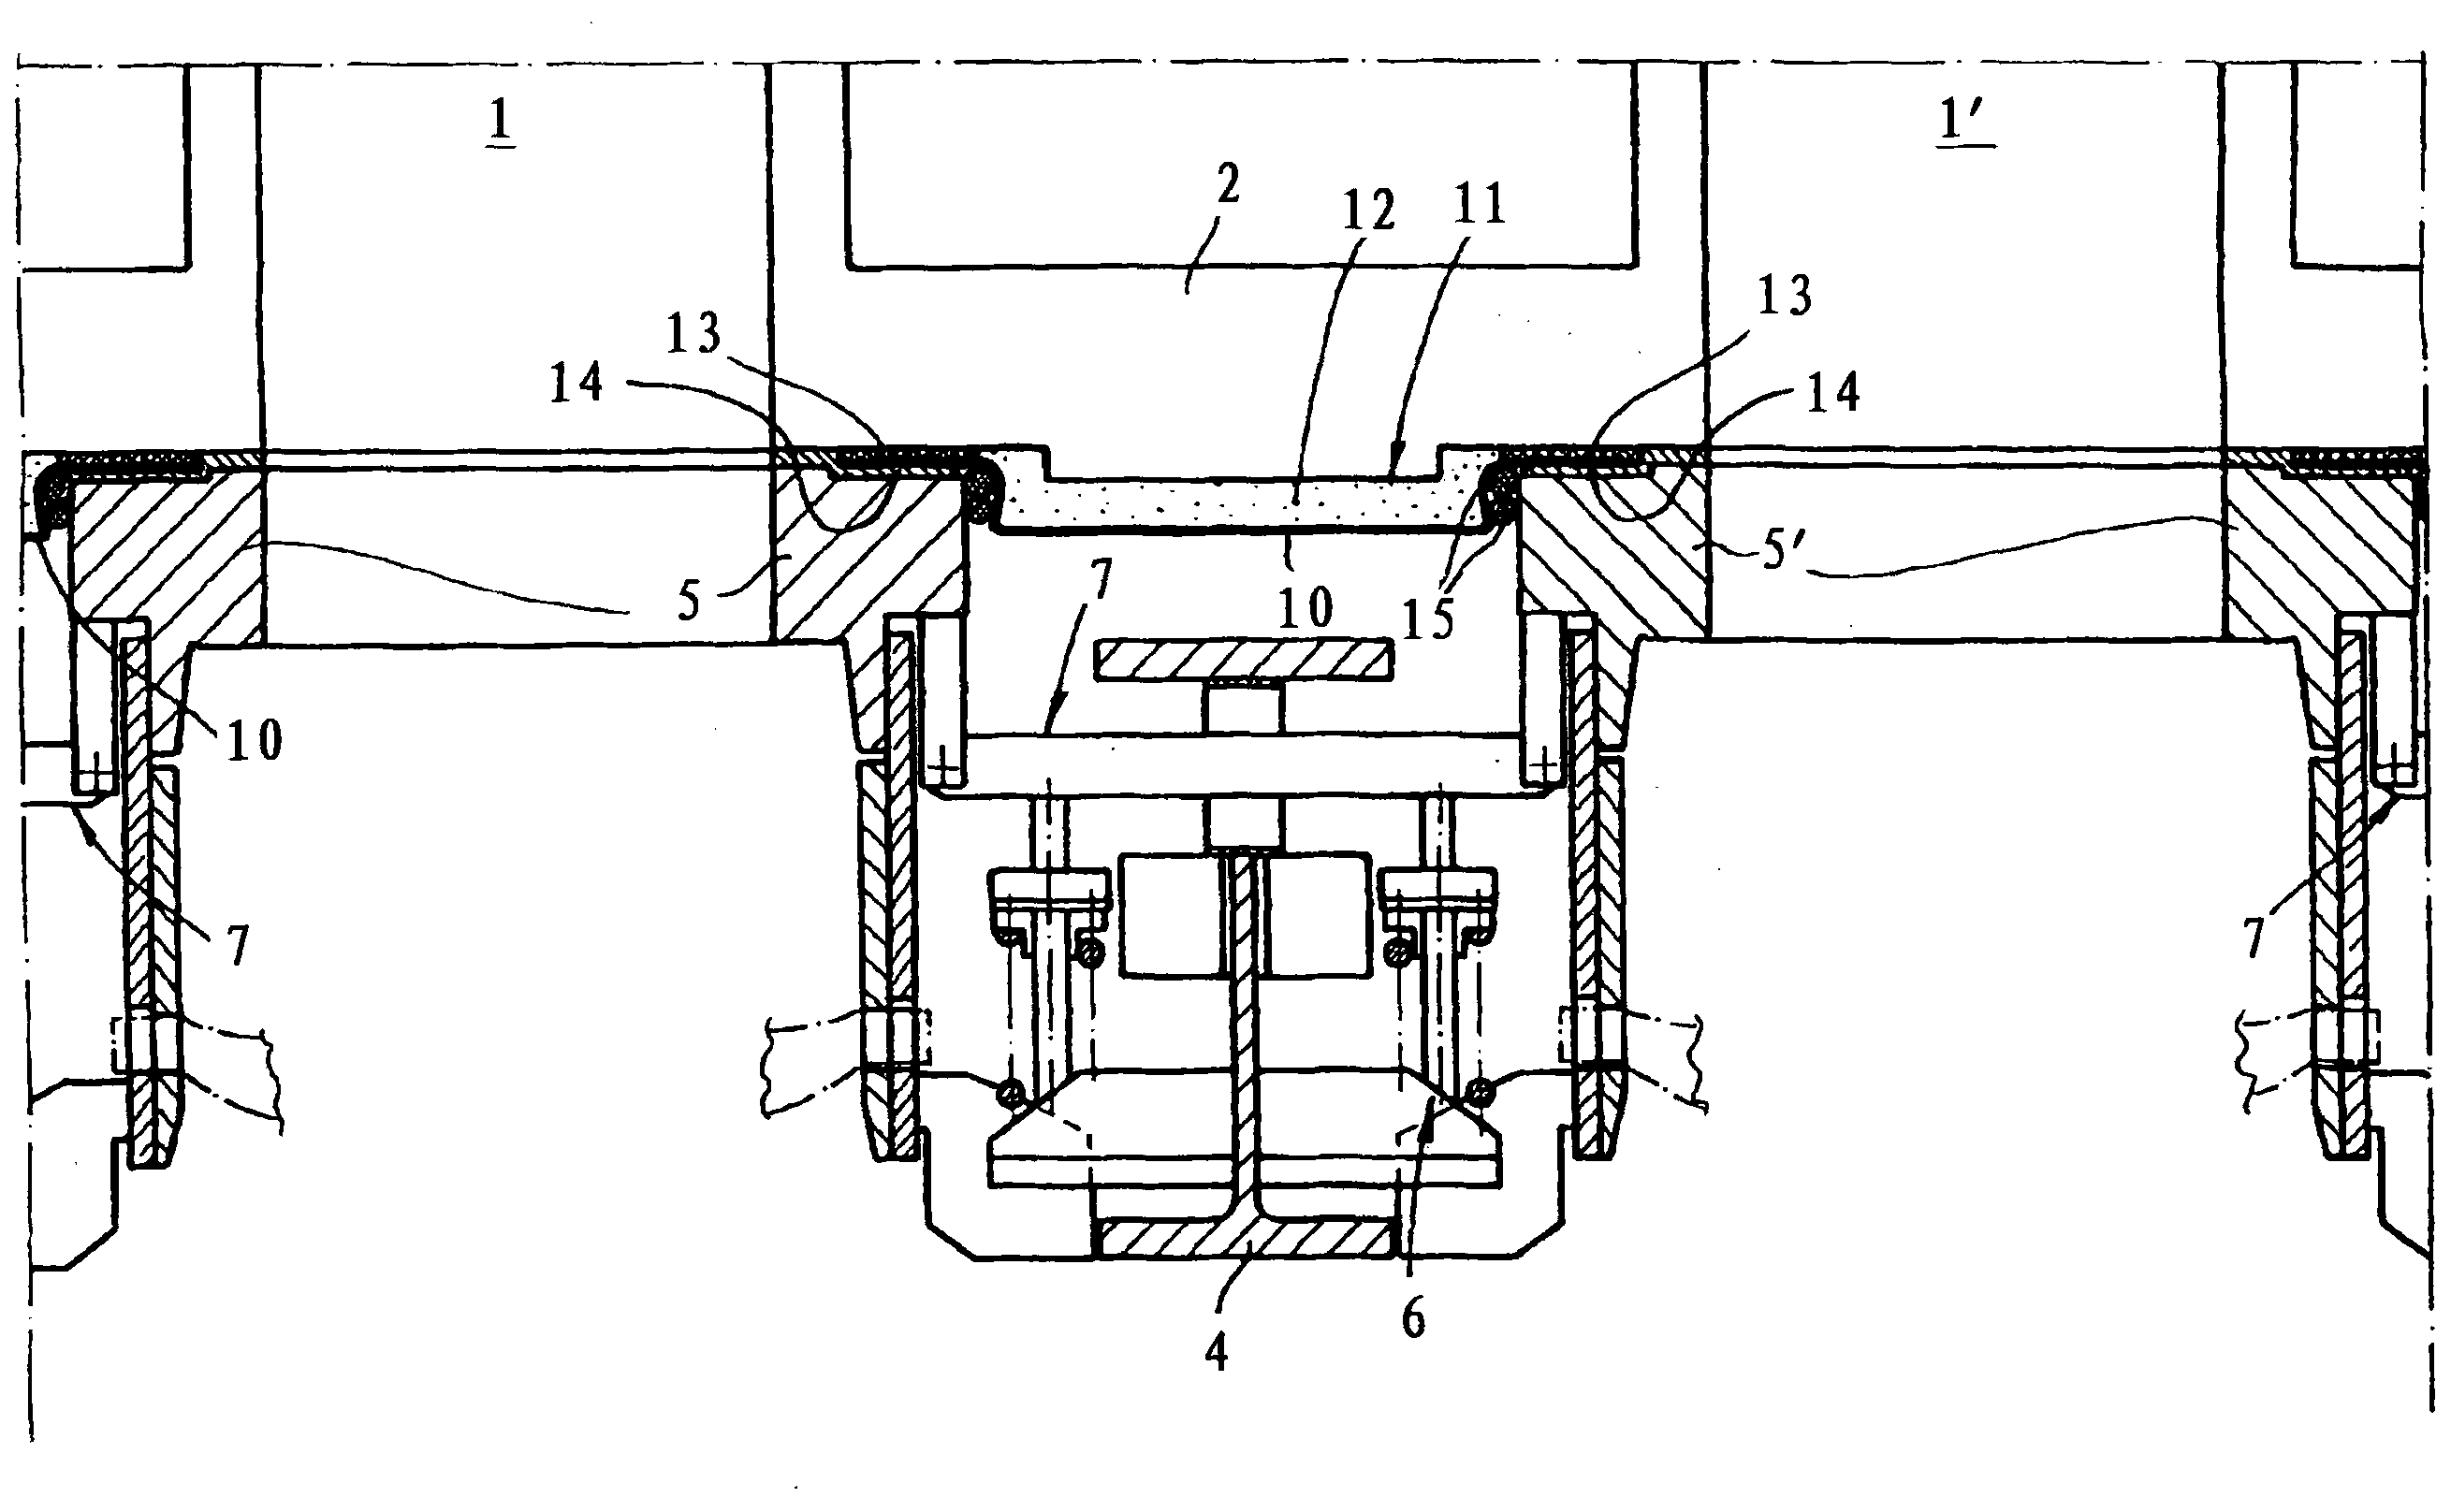 Wall protector for a heating wall head between two oven chamber openings of a coke oven battery